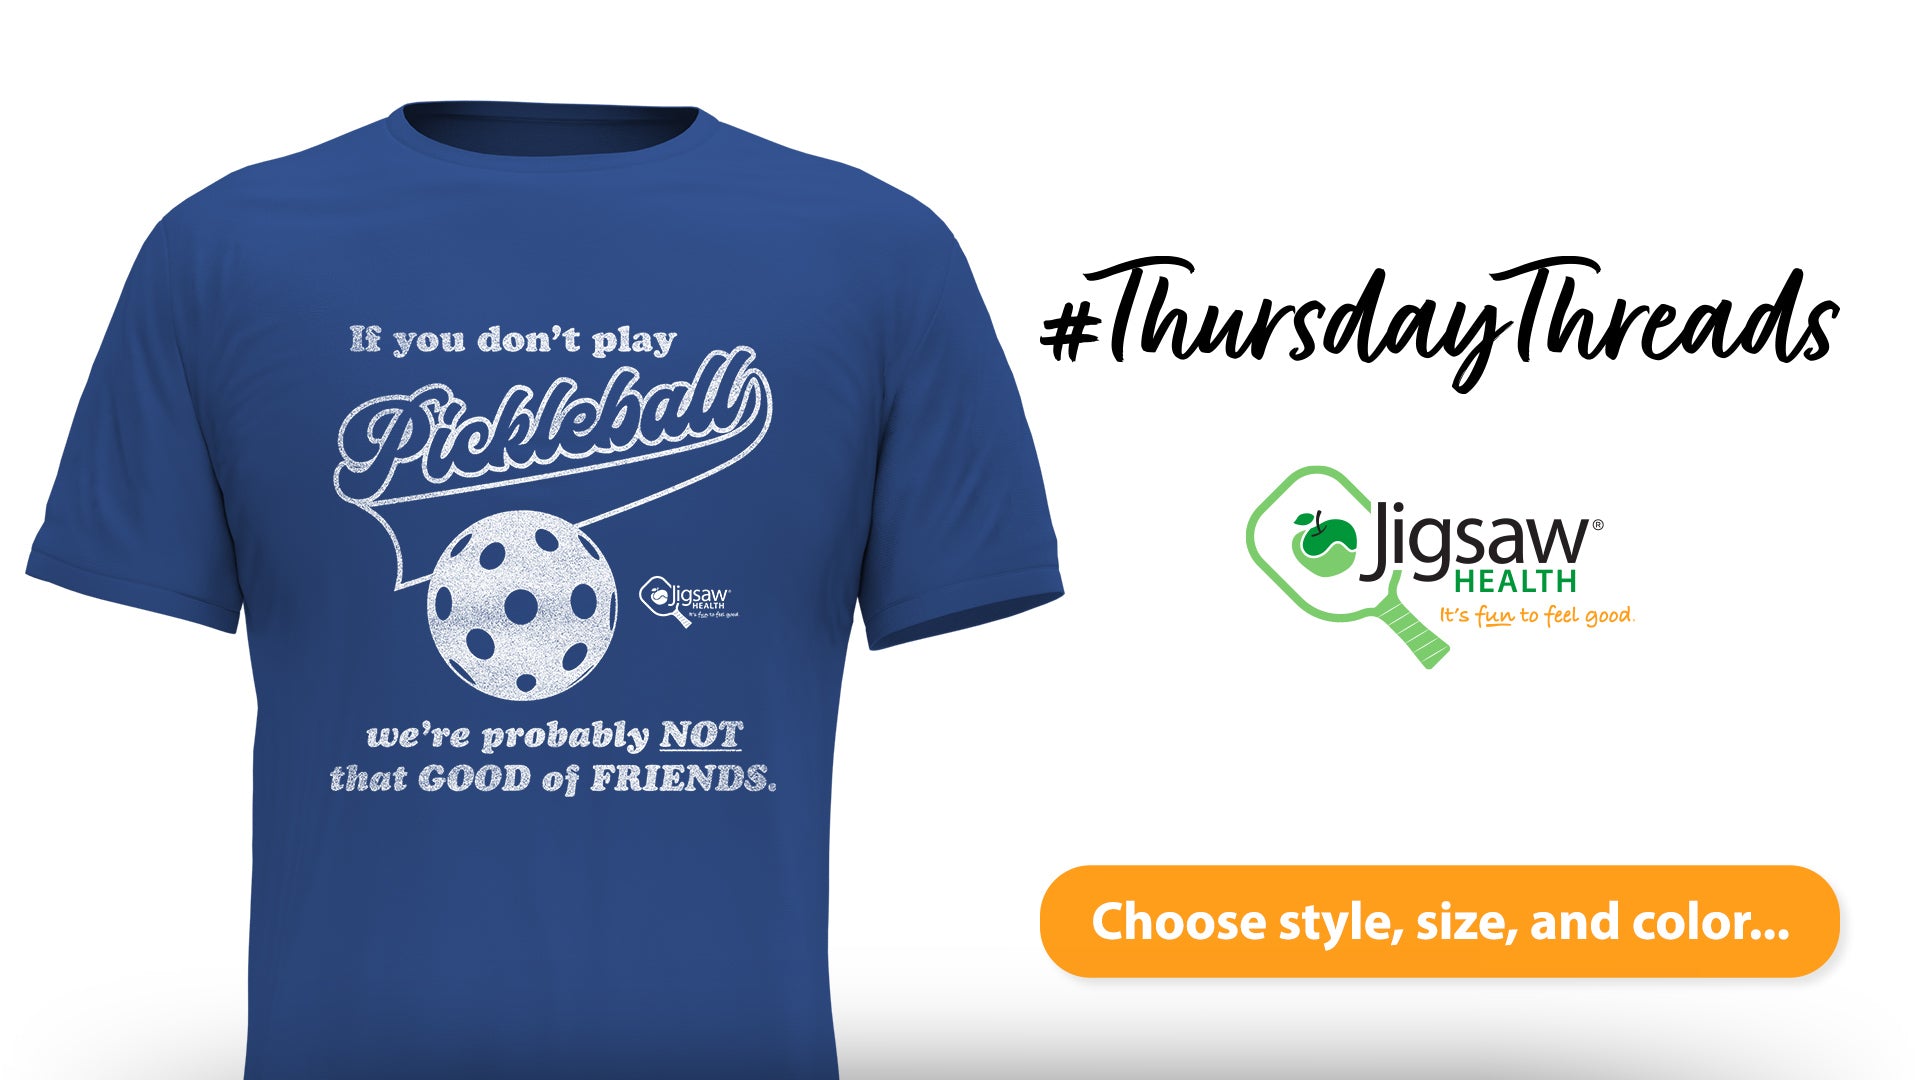 If you don't play Pickleball, we're probably not that good of friends | #ThursdayThreads